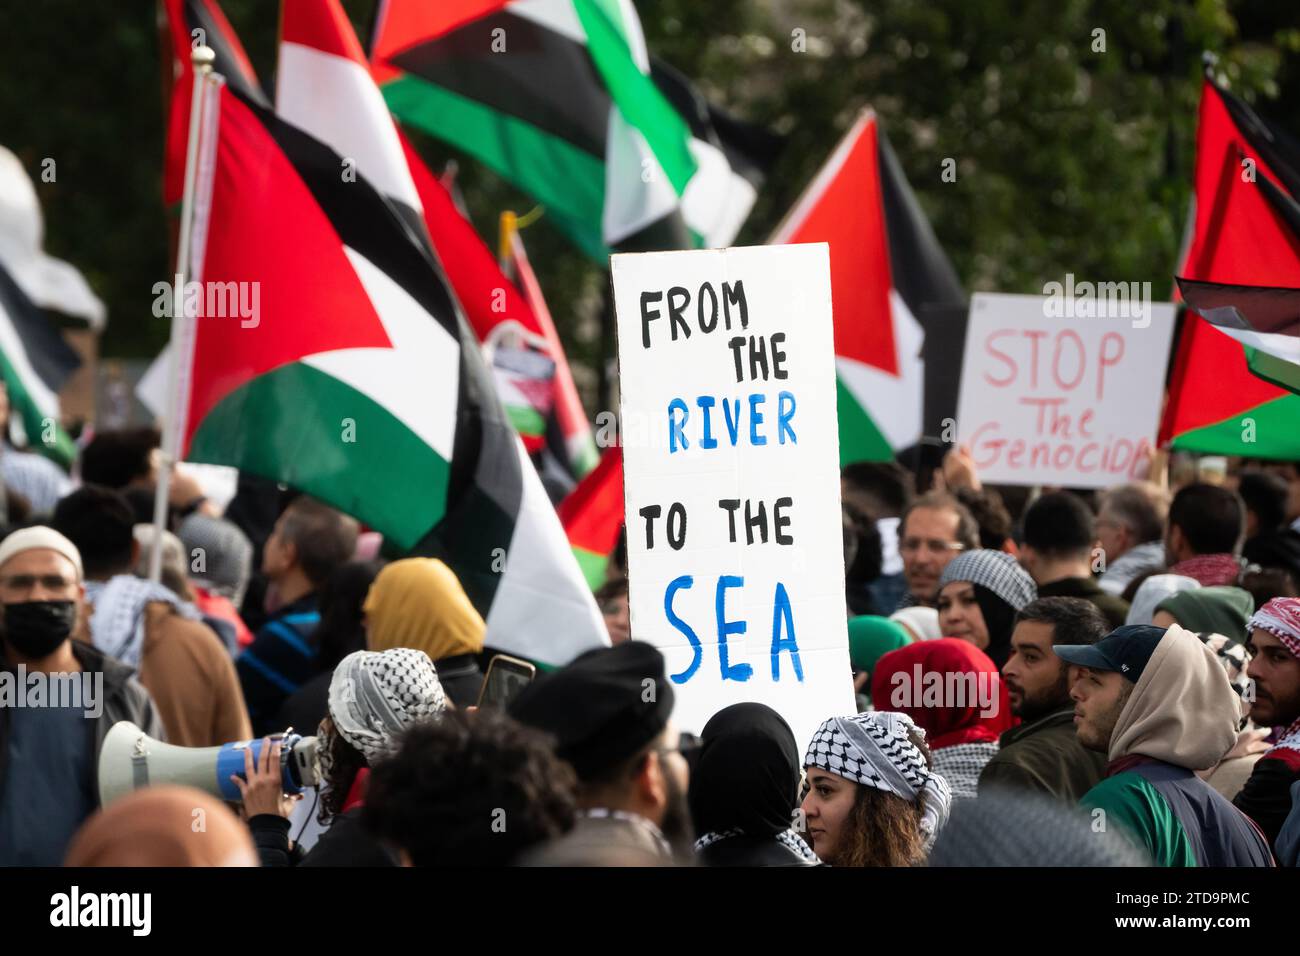 A protestor holds a sign with the "River to the Sea" slogan often considered to be genocidal at a pro-Palestinian rally in Mississauga, ON. Stock Photo